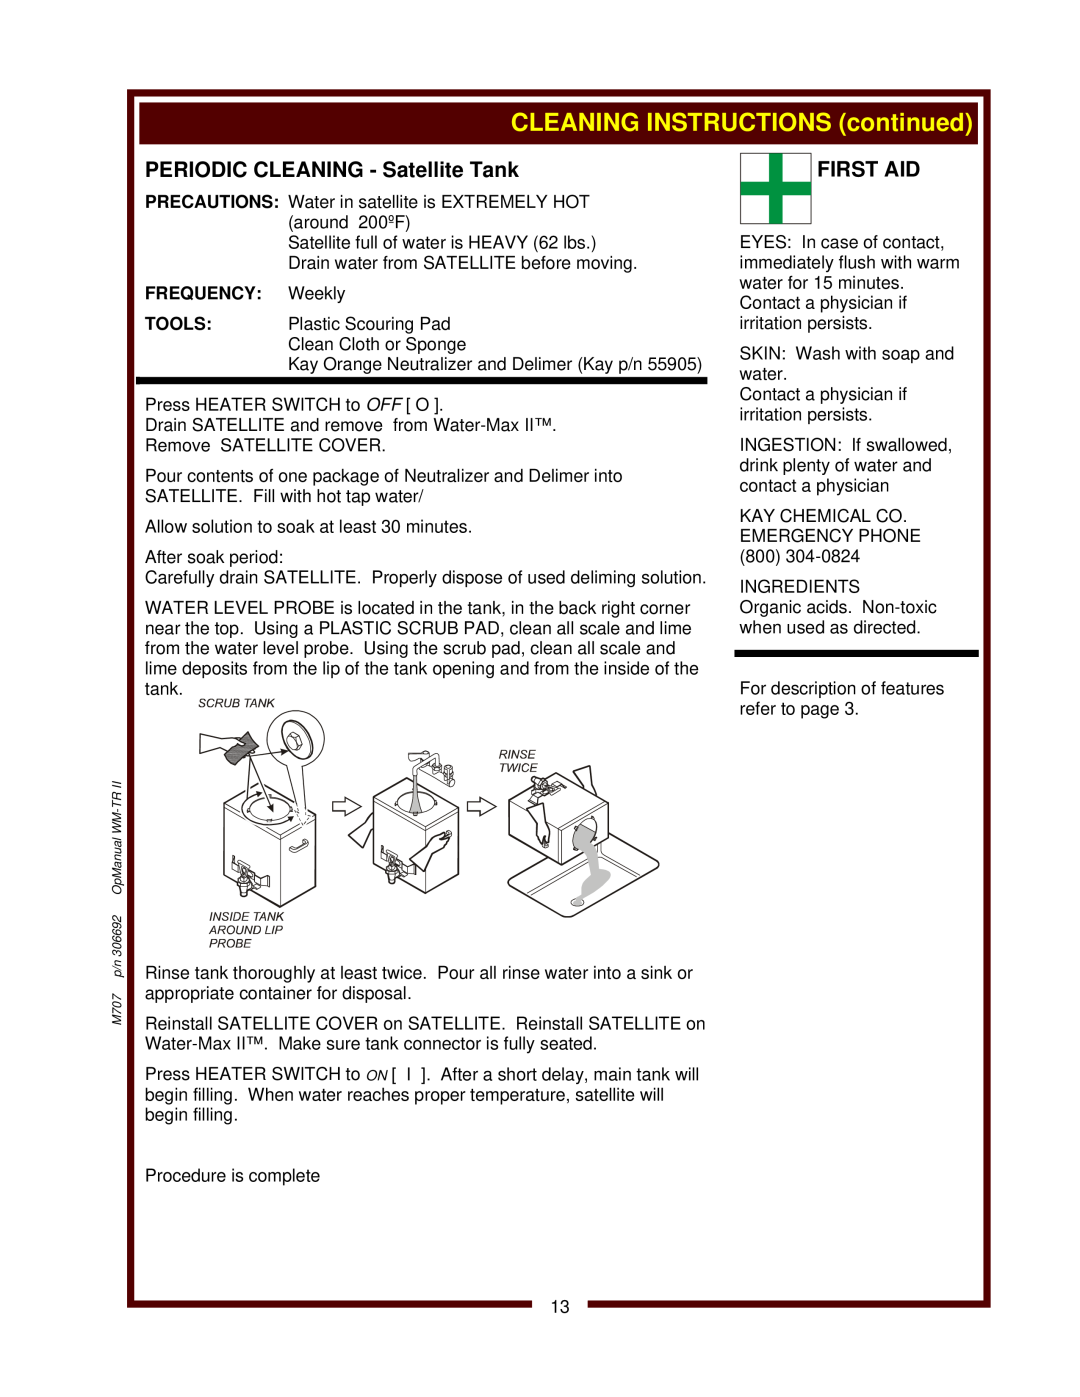 Wells WM-TR II operation manual CLEANING INSTRUCTIONS continued, M707 p/n 306692 OpManual WM-TR 